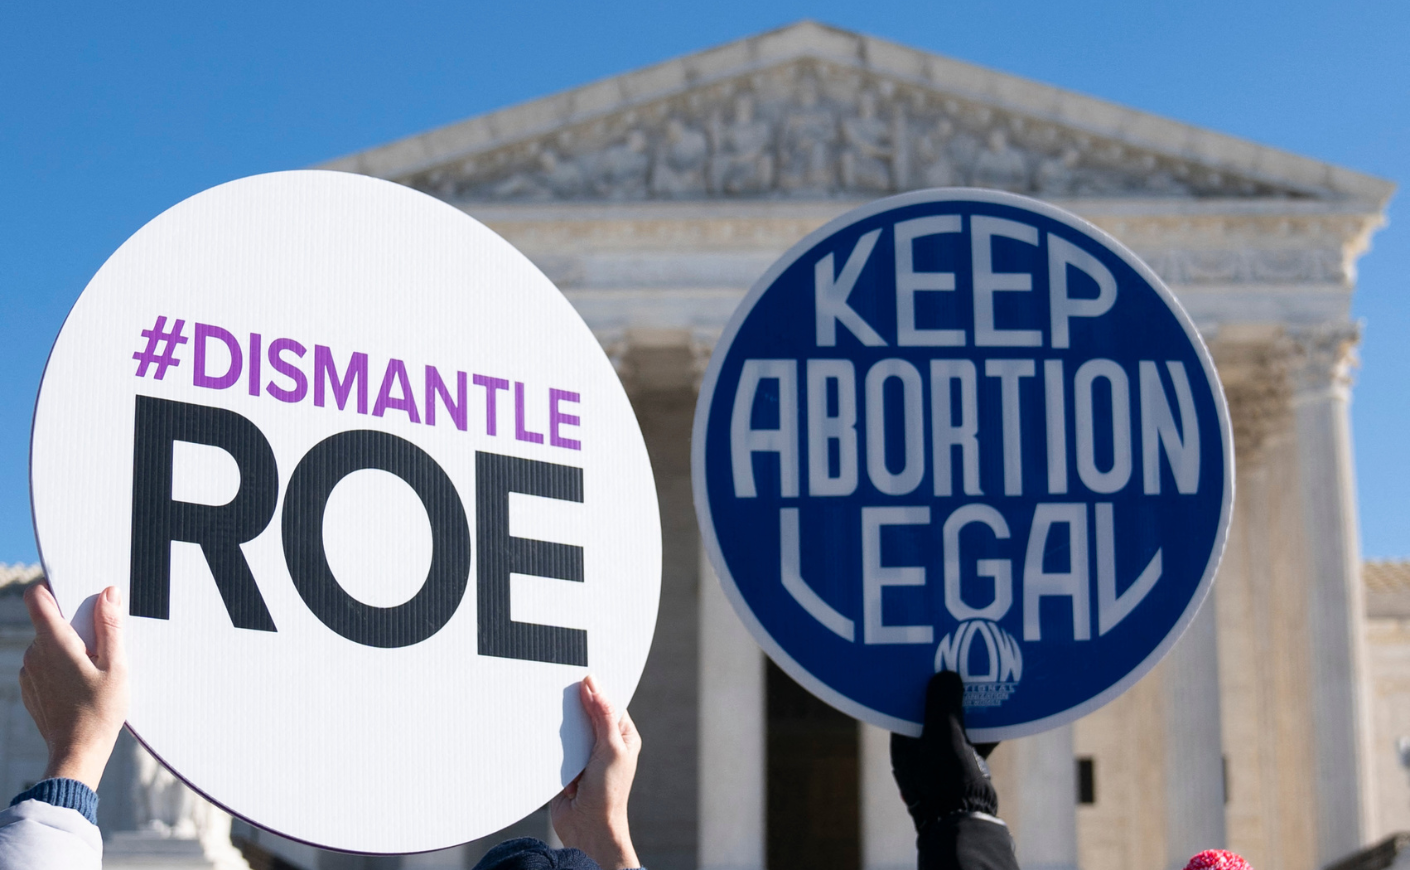 Demonstrators hold signs reading "Dismantle Roe" and "Keep Abortion Legal"